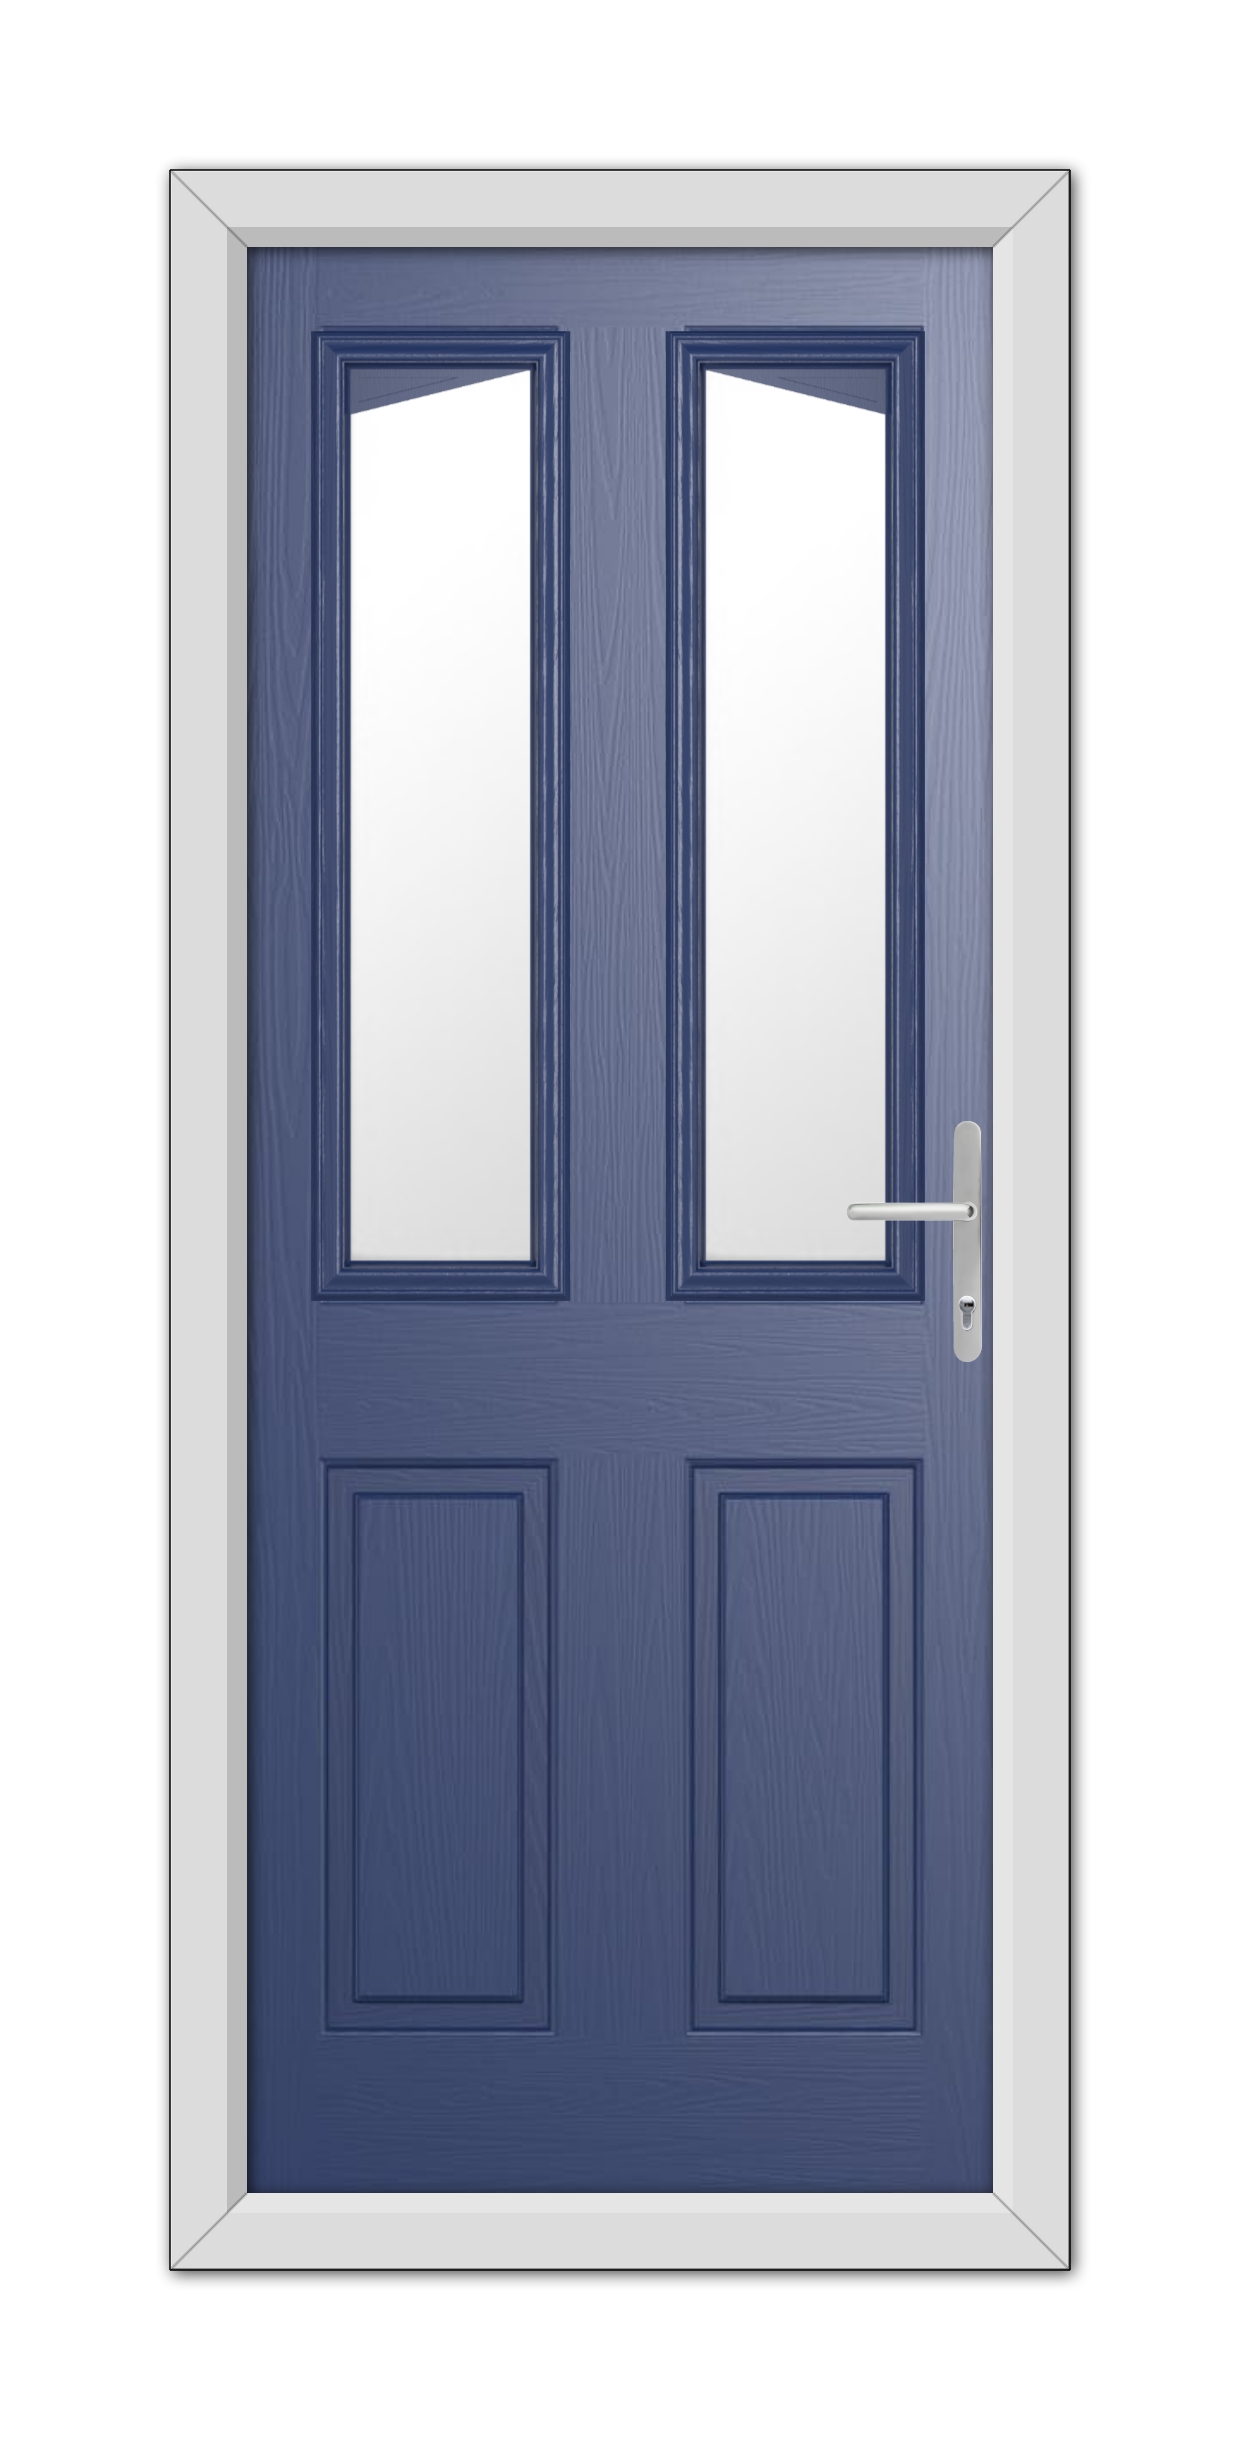 A double-panel Blue Highbury Composite Door 48mm Timber Core with upper half glass windows, set in a white frame, viewed from the front.